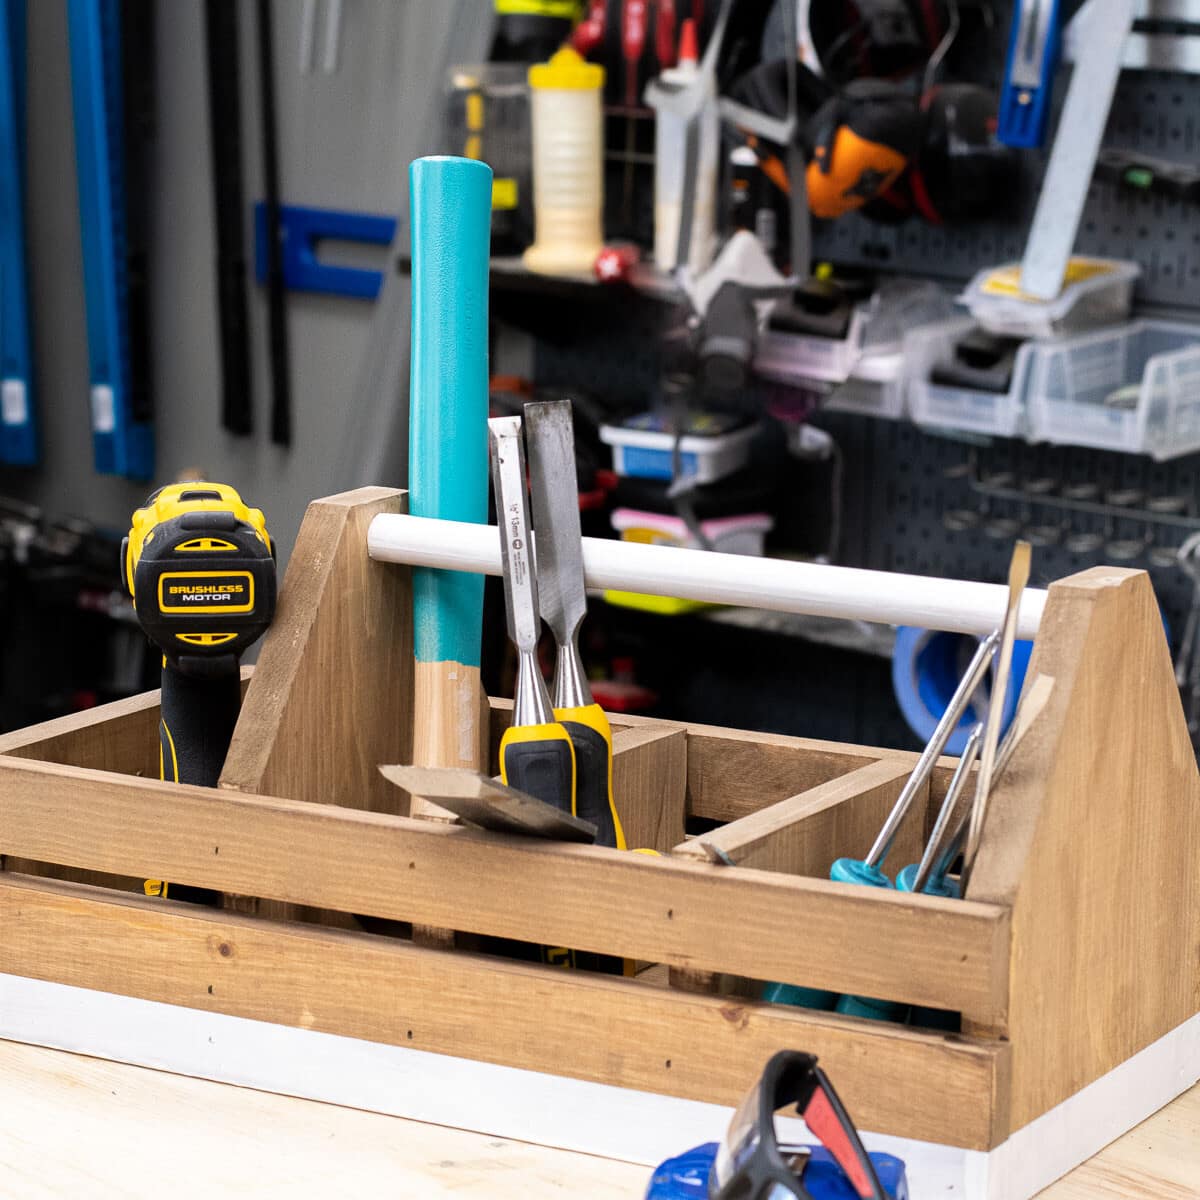 Want to build a wooden DIY tool box? With these beginner-friendly plans, tools, and supplies, you can build your first toolbox in under an hour!